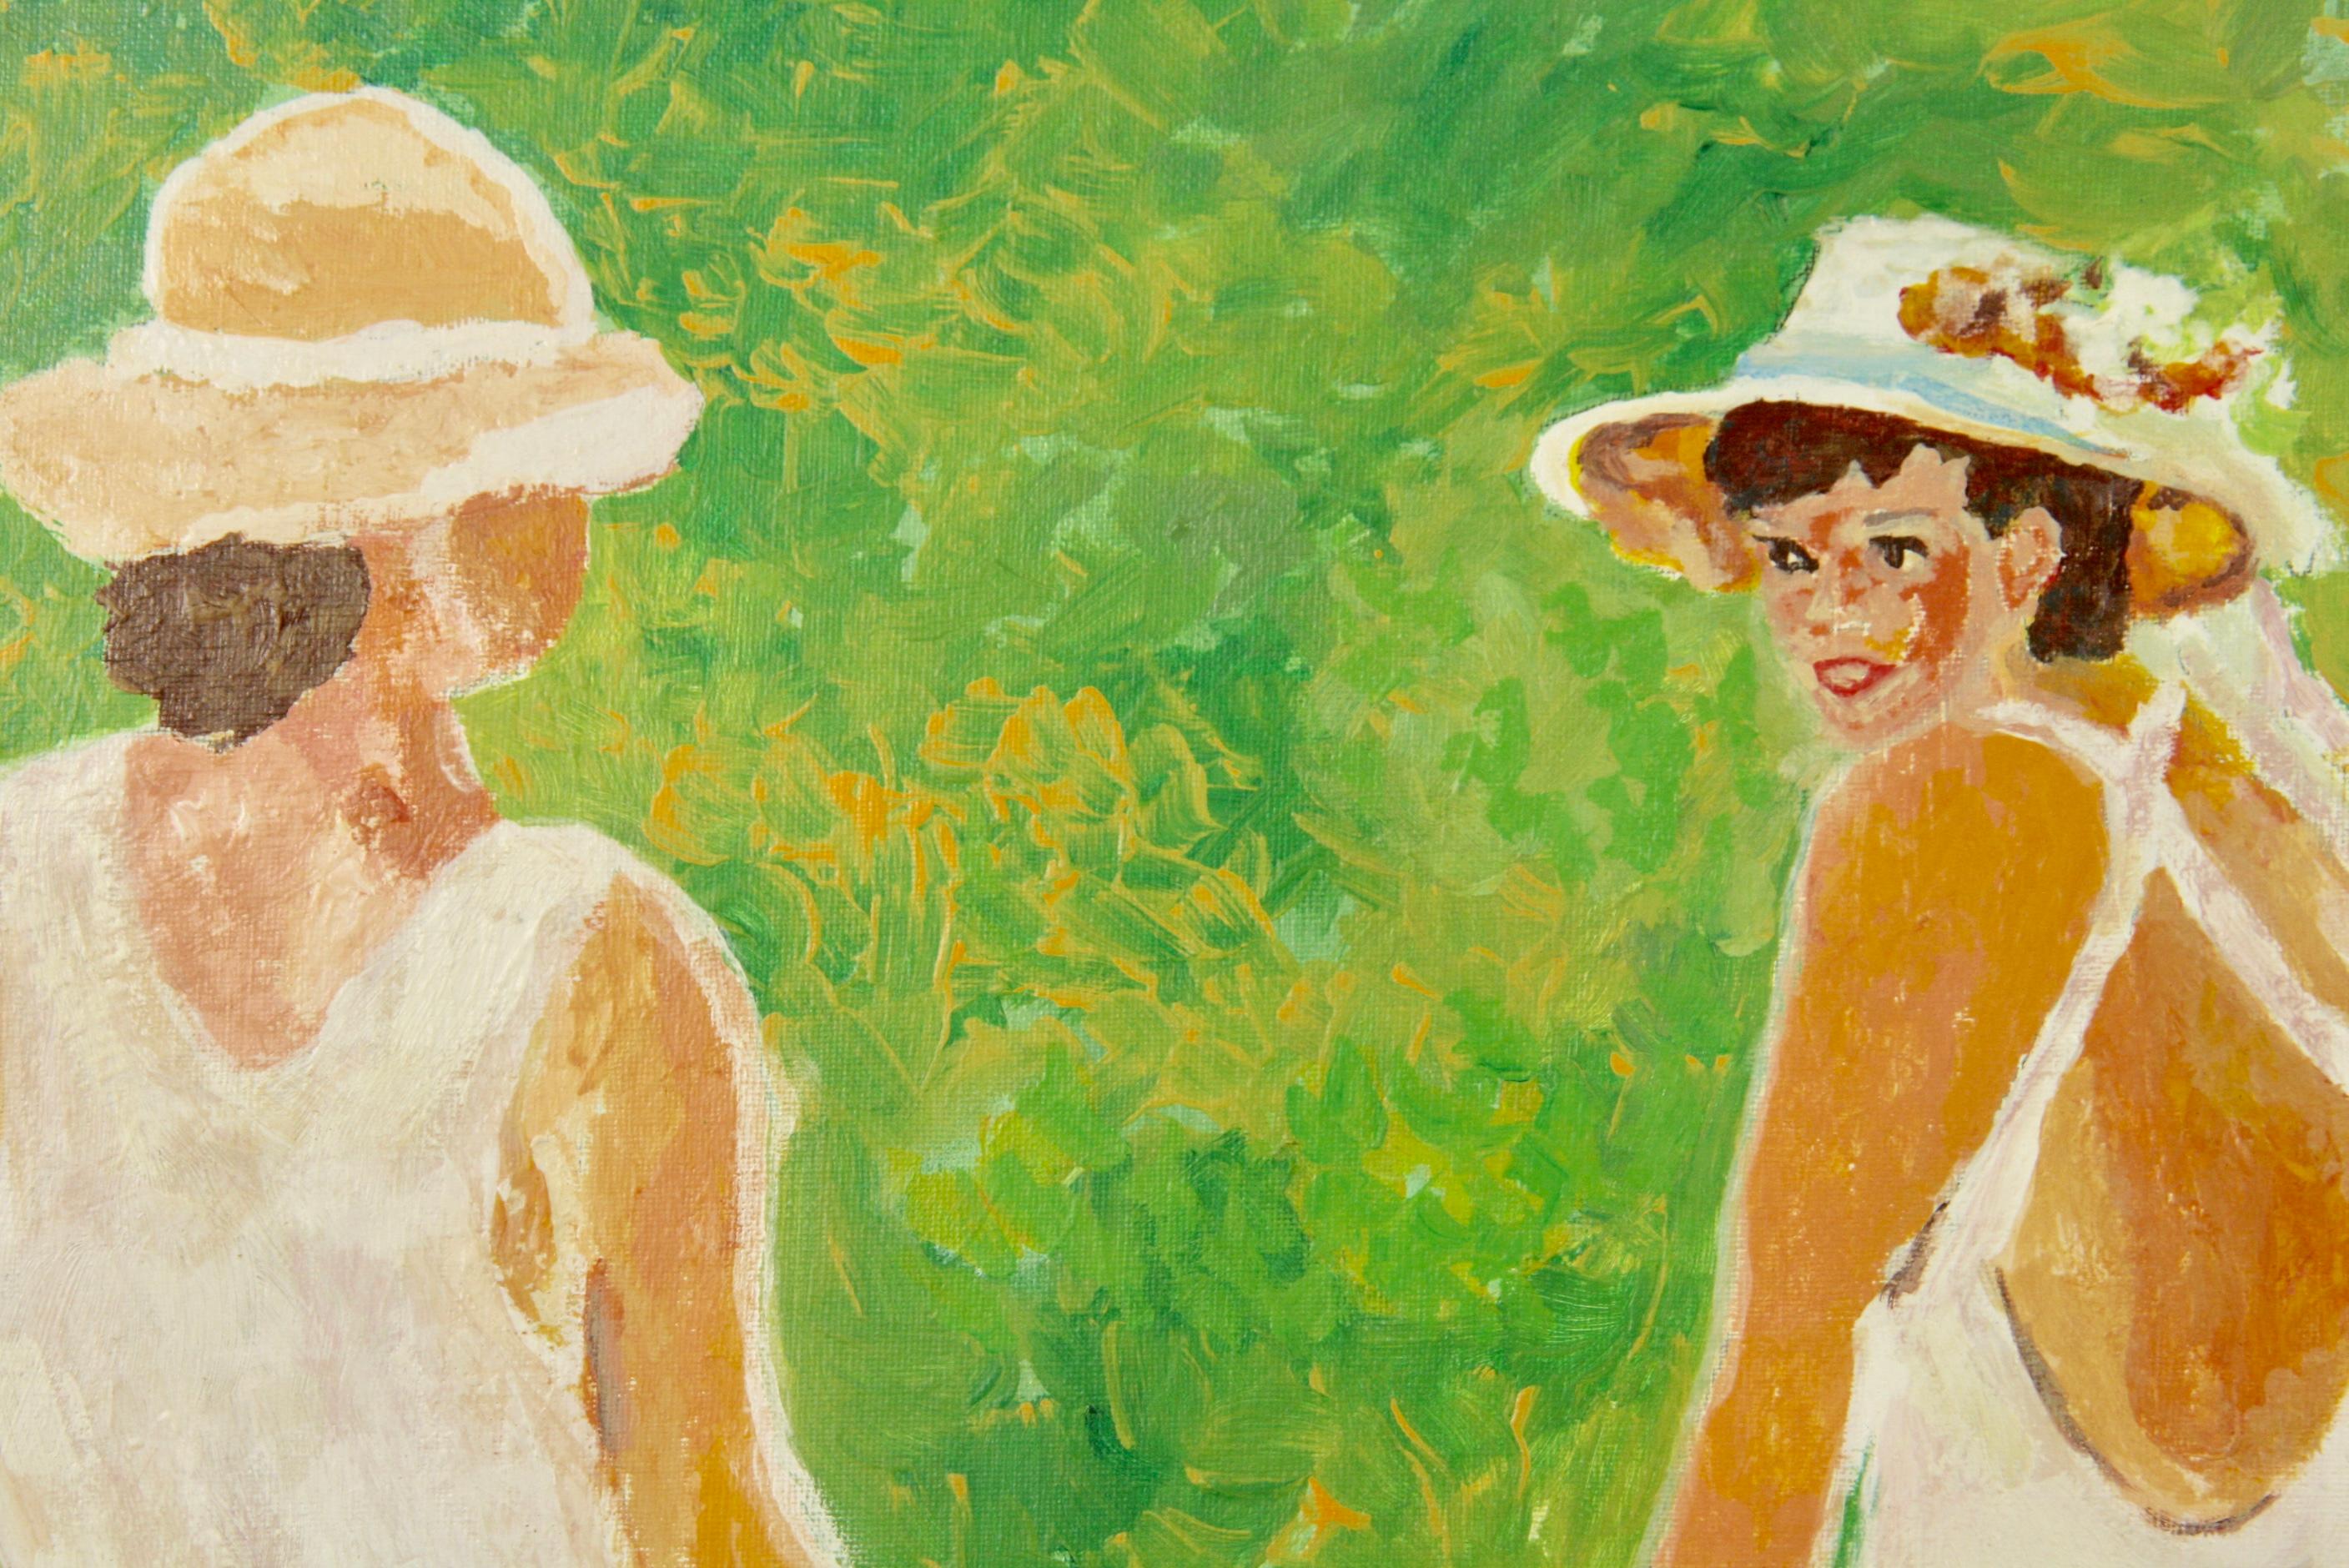  Summer in the Hamptons  Figurative Painting 2